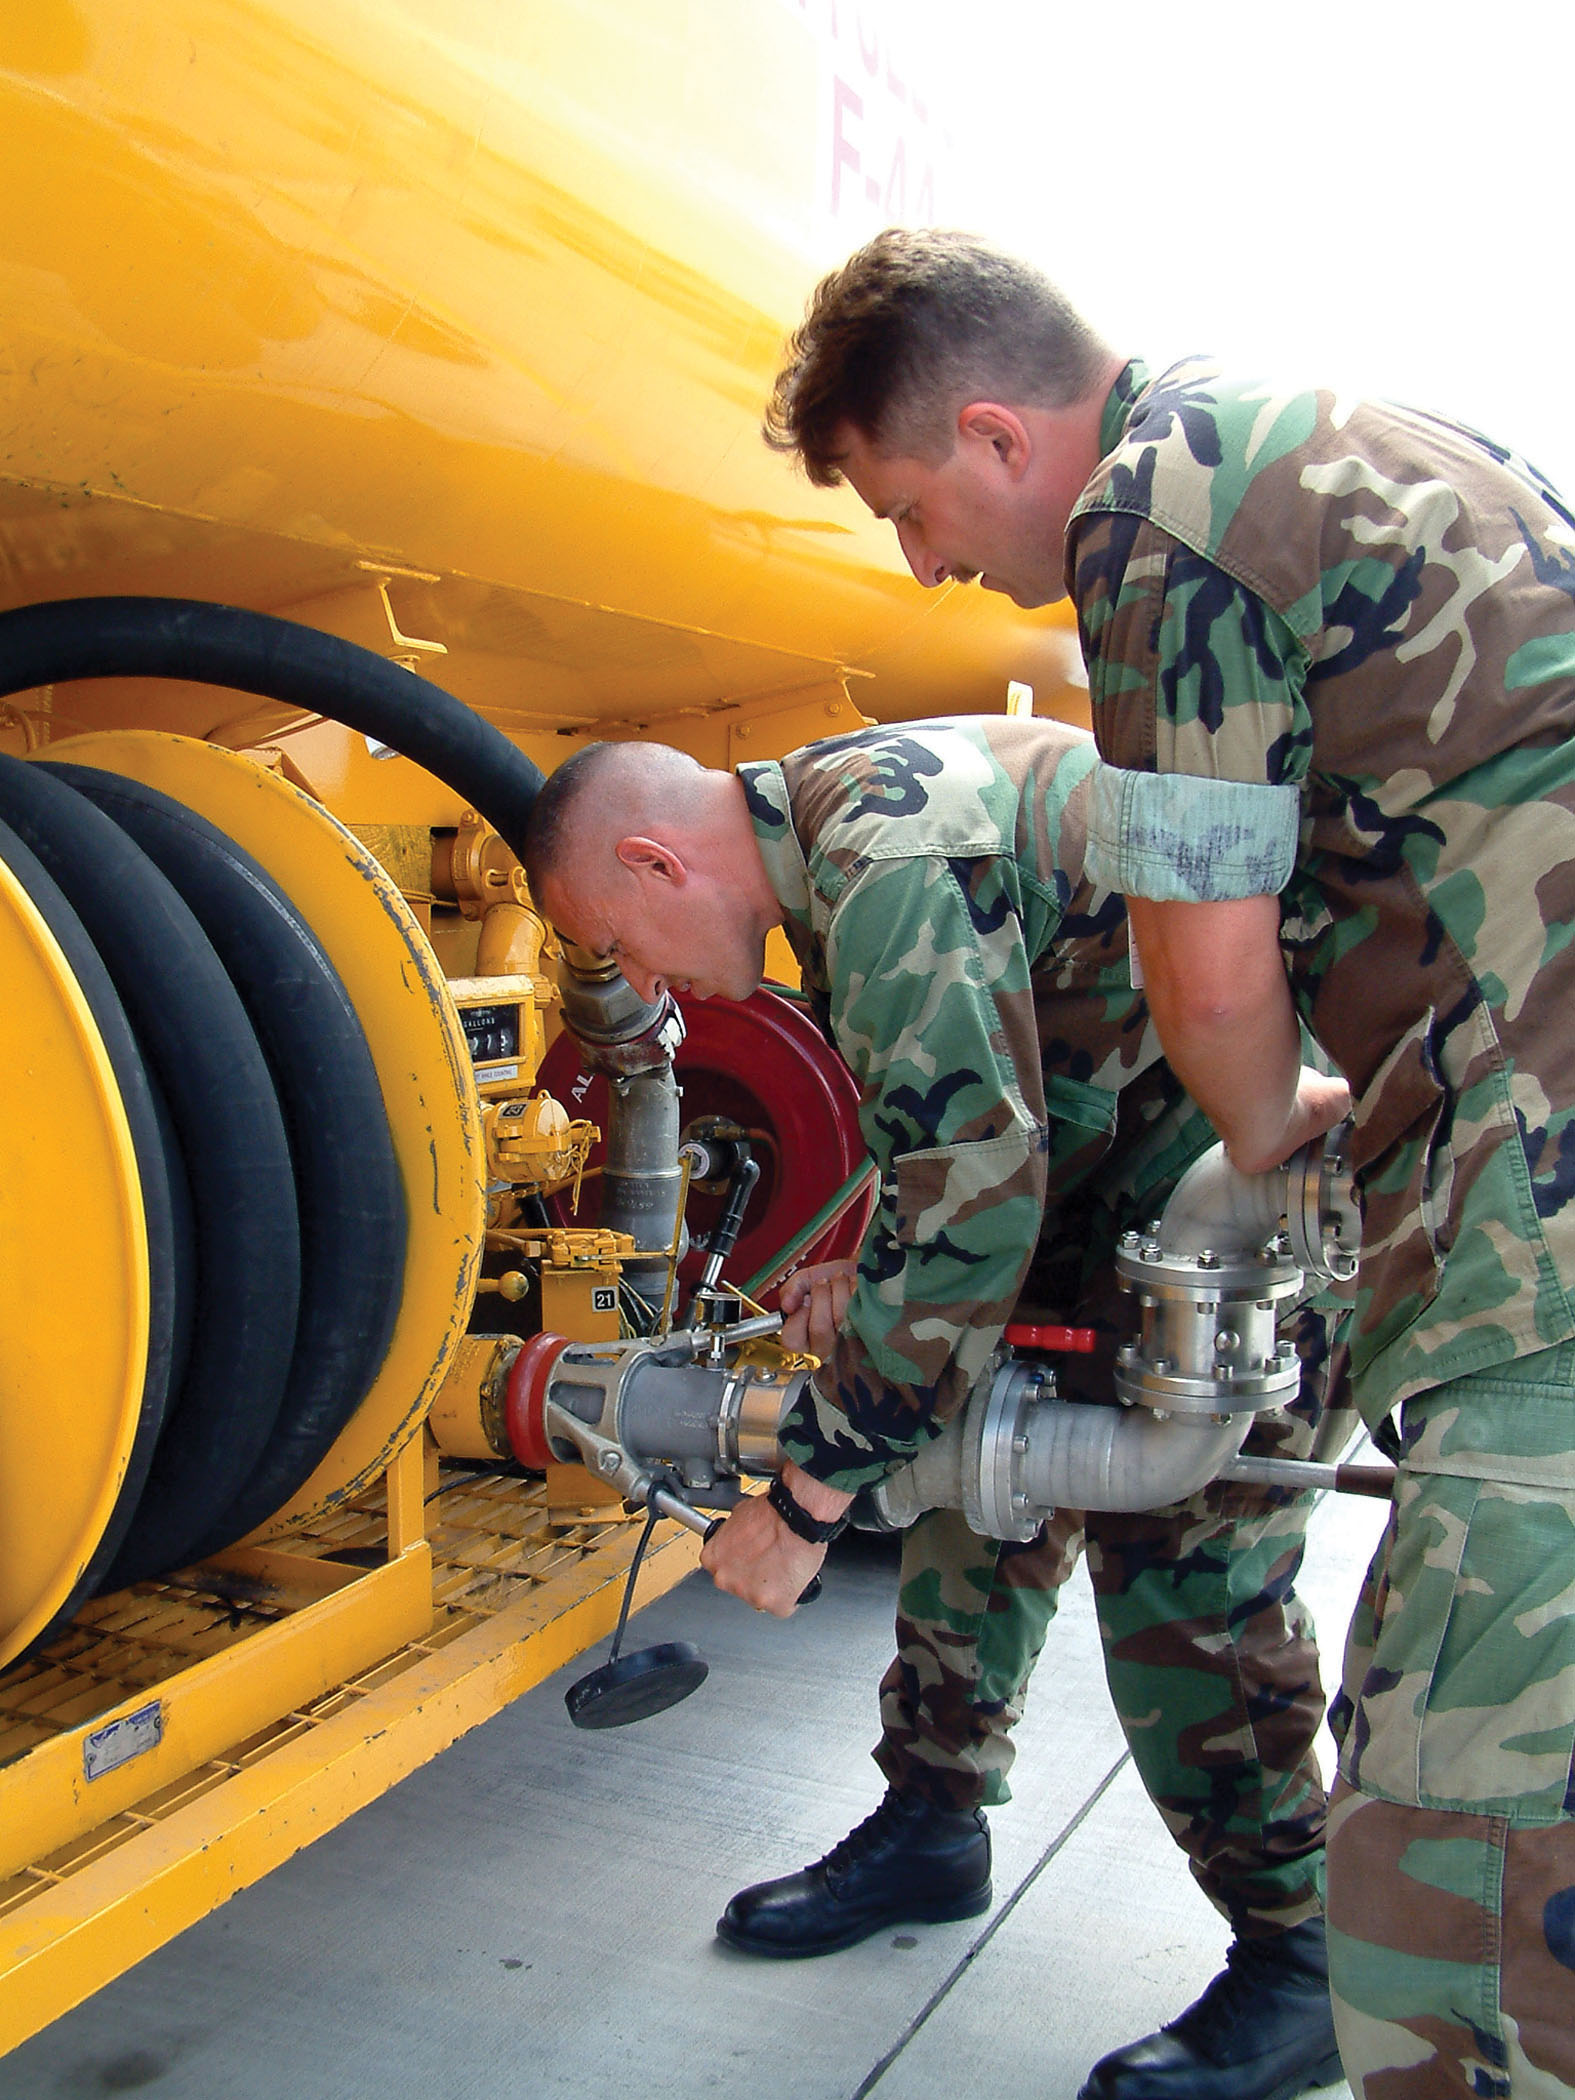 US Navy 030620-N-5821W-003 Lt. Cmdr. Timothy Dudley and Aviation Boatswains' Mate 1st Class Ron Howton connects a nozzle to a 5,000 gallon refueling tanker on the NAS Sigonella flight line